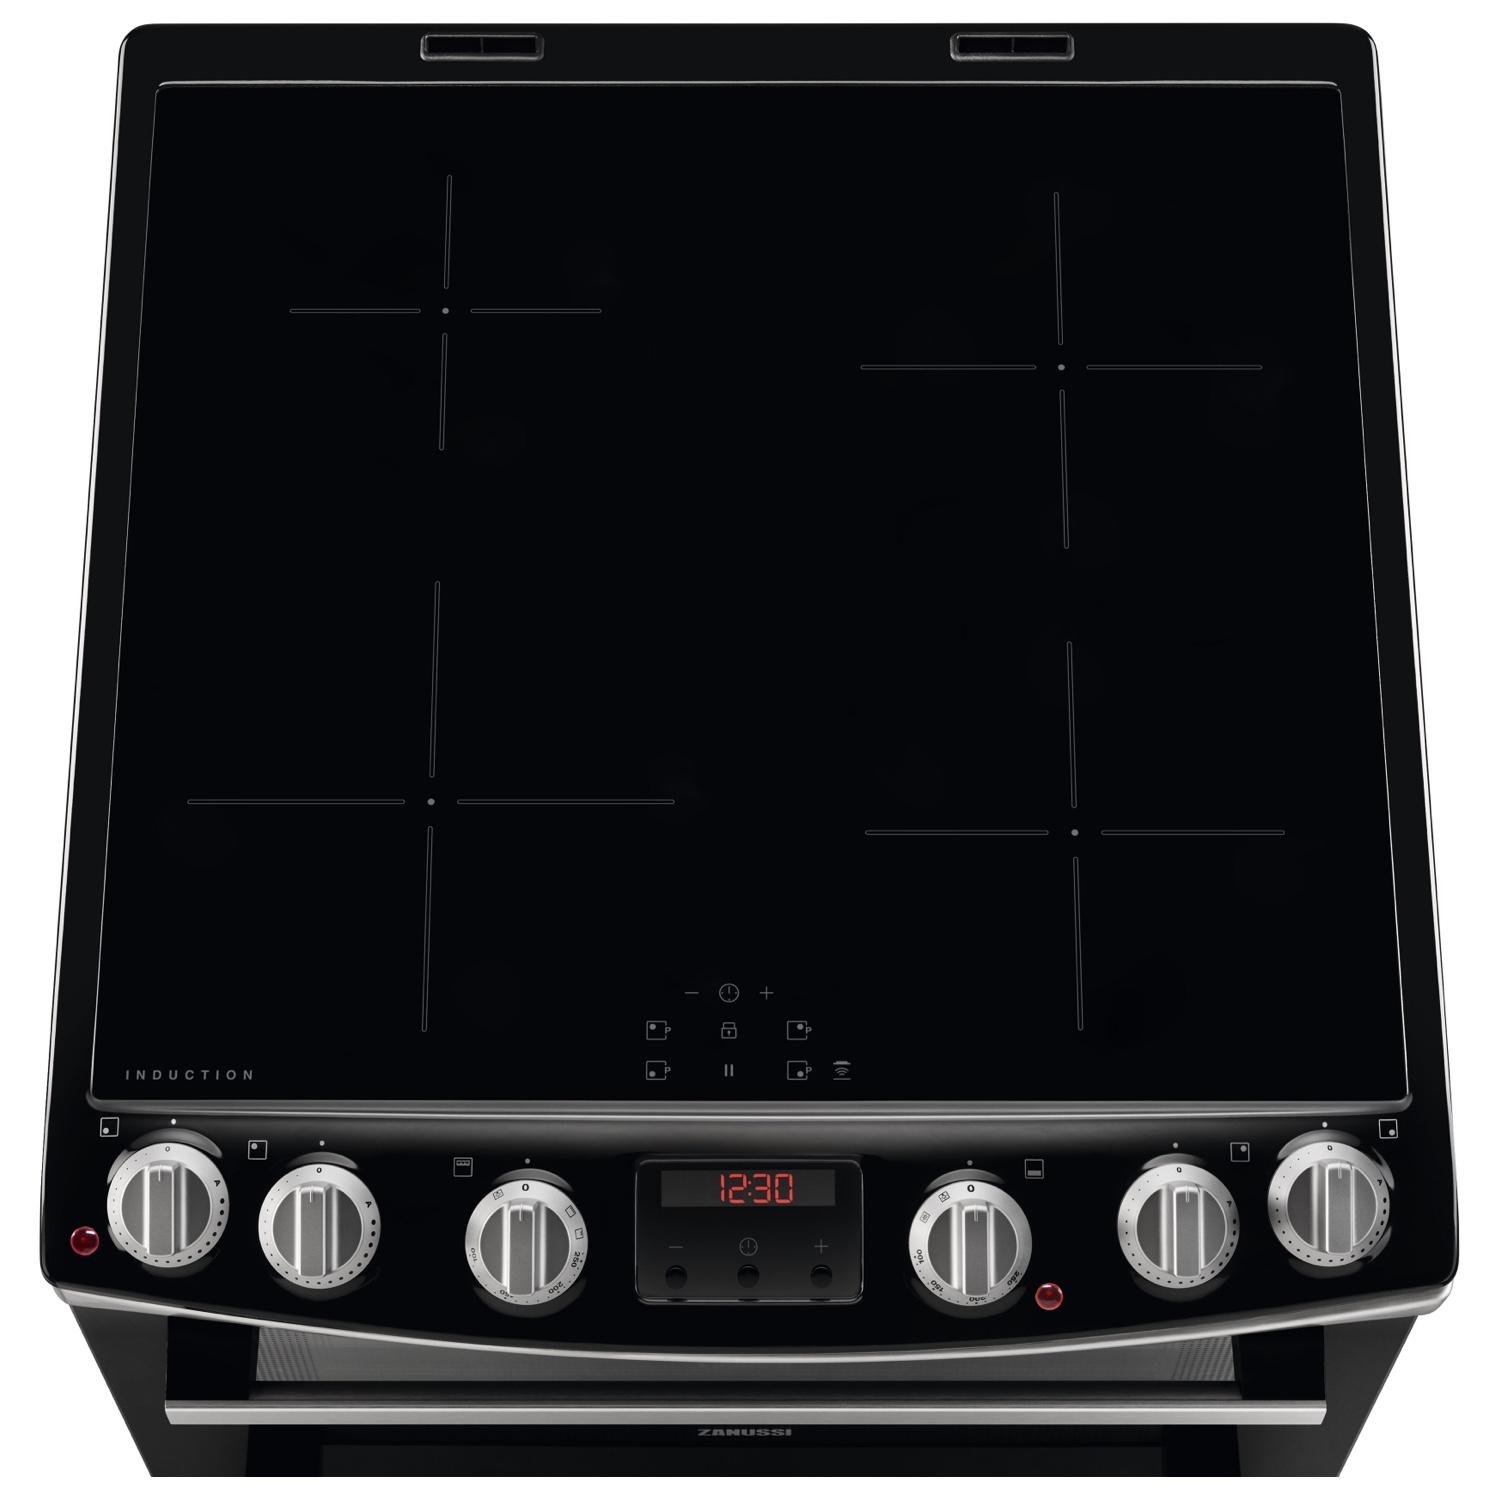 Zanussi ZCI66288XA 60cm Electric Double Oven with Induction Hob - Black and Stainless Steel - 1